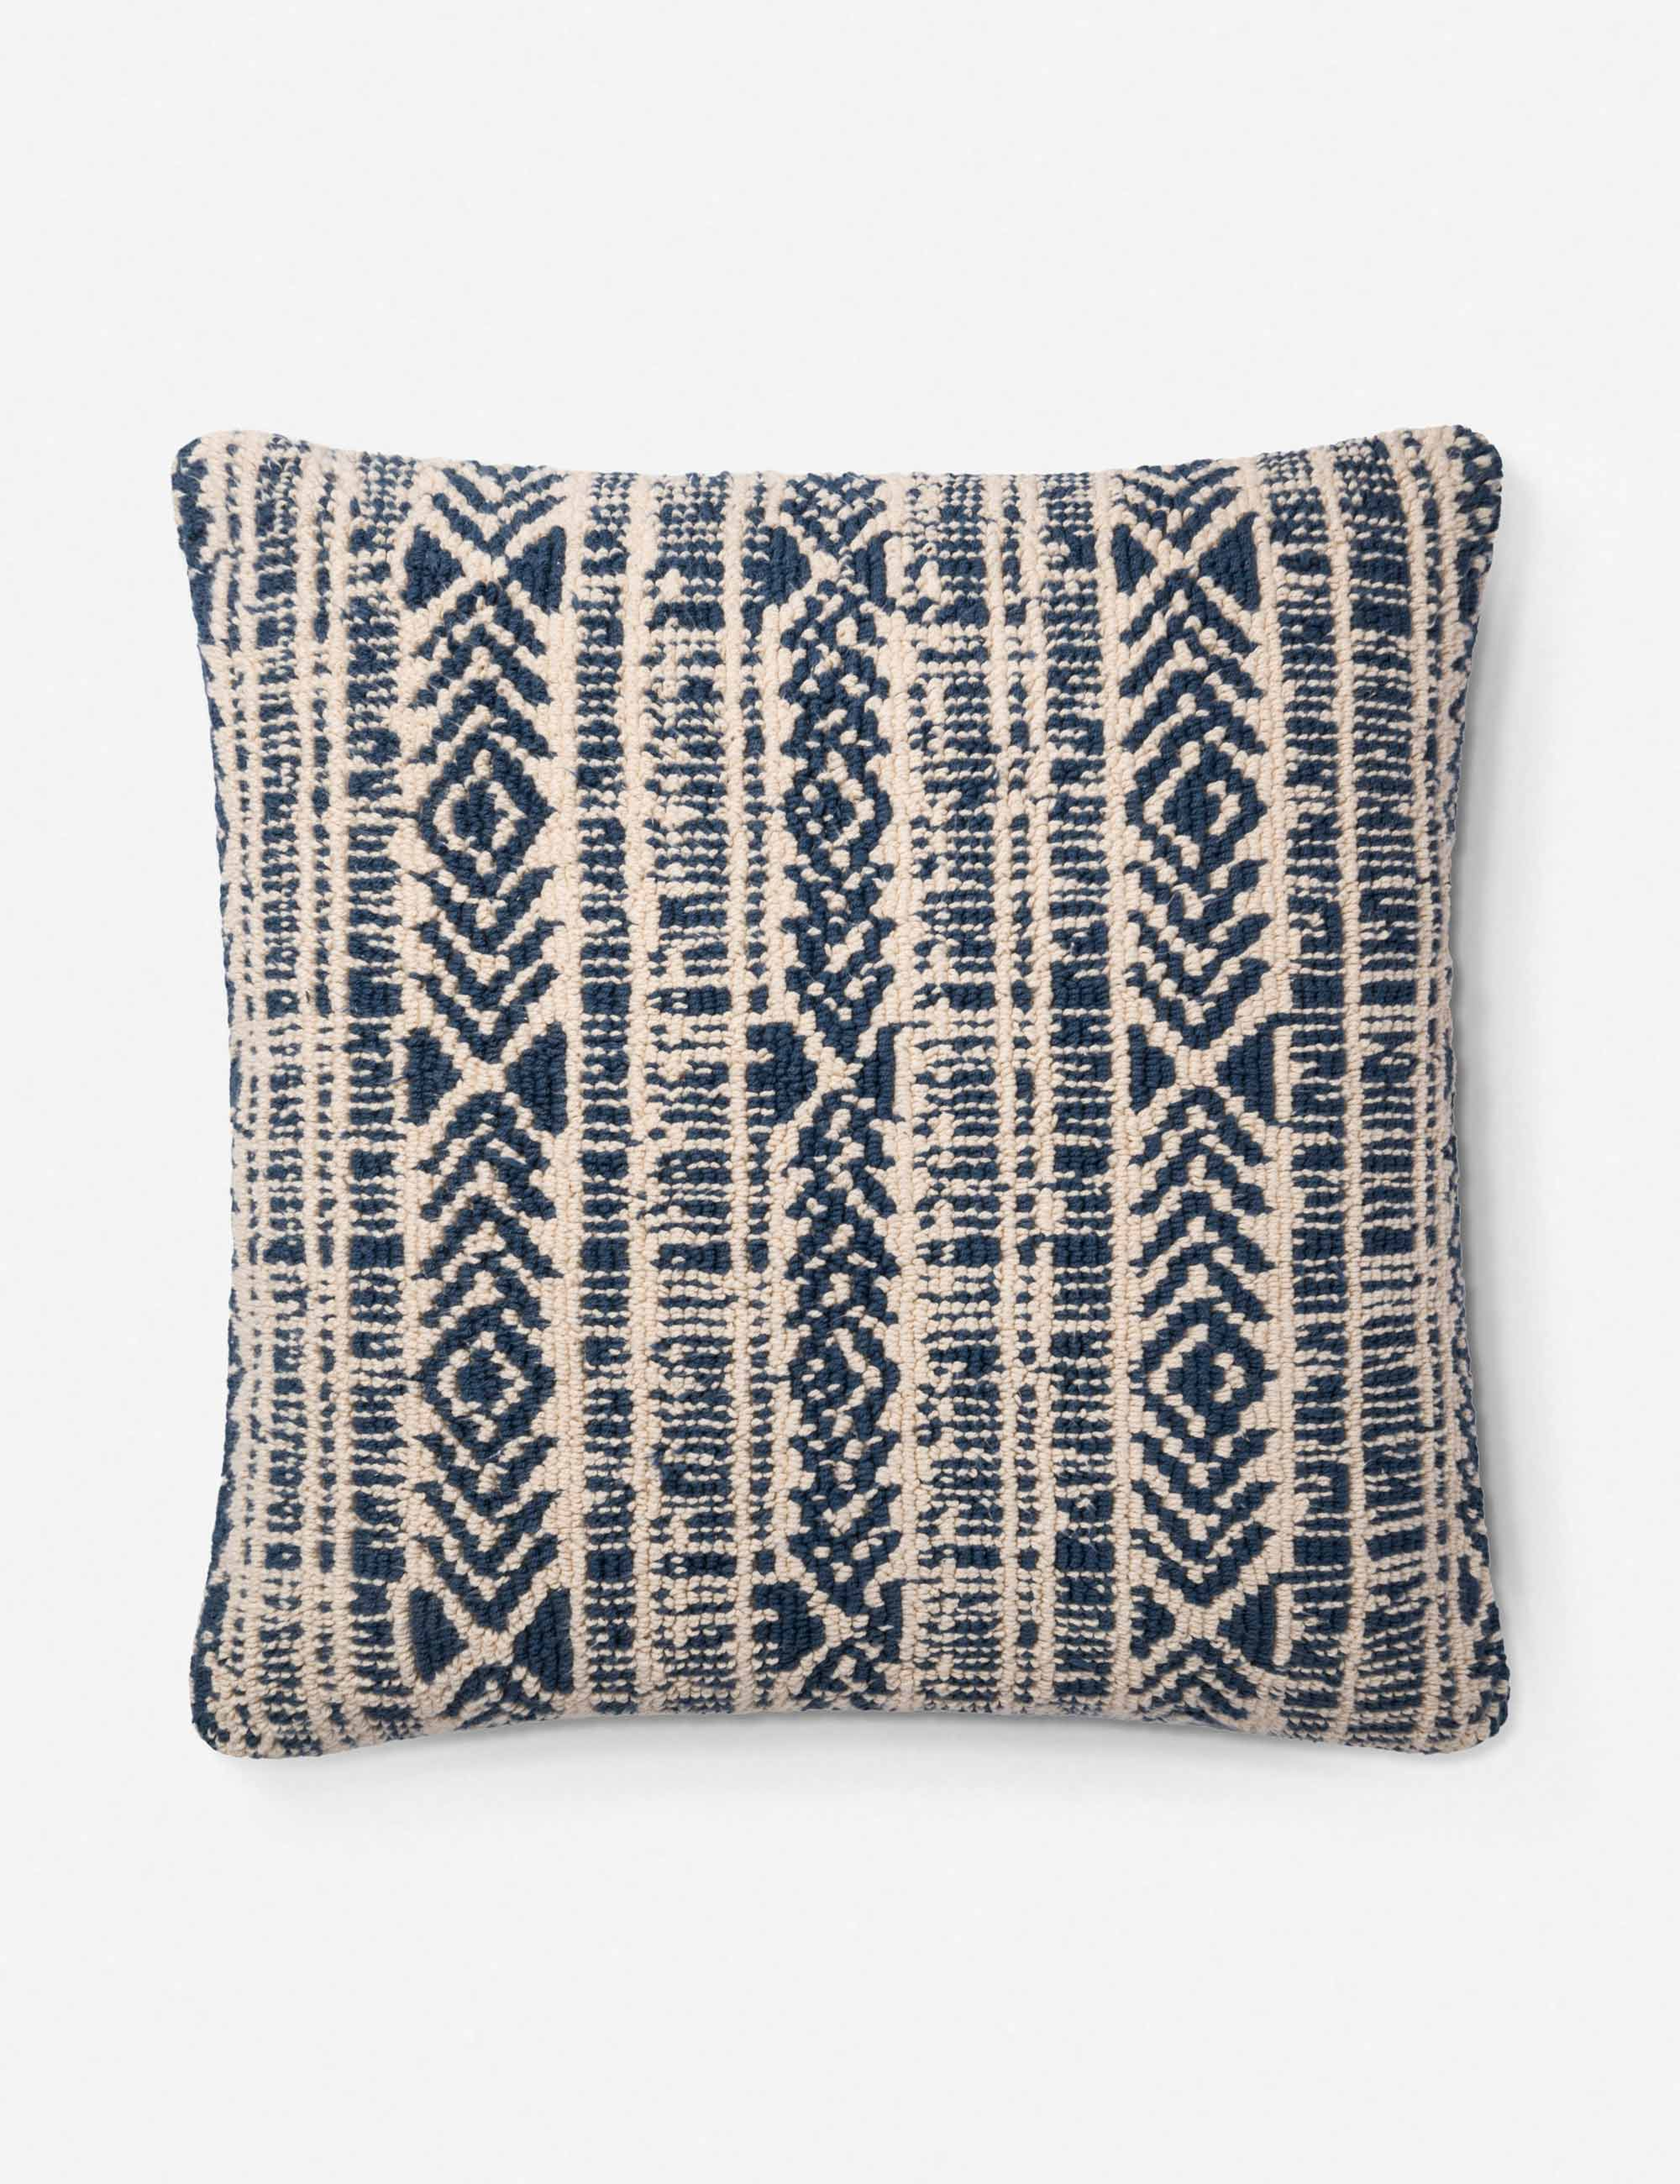 Ione Pillow, Navy and Ivory 22" x 22" - Lulu and Georgia